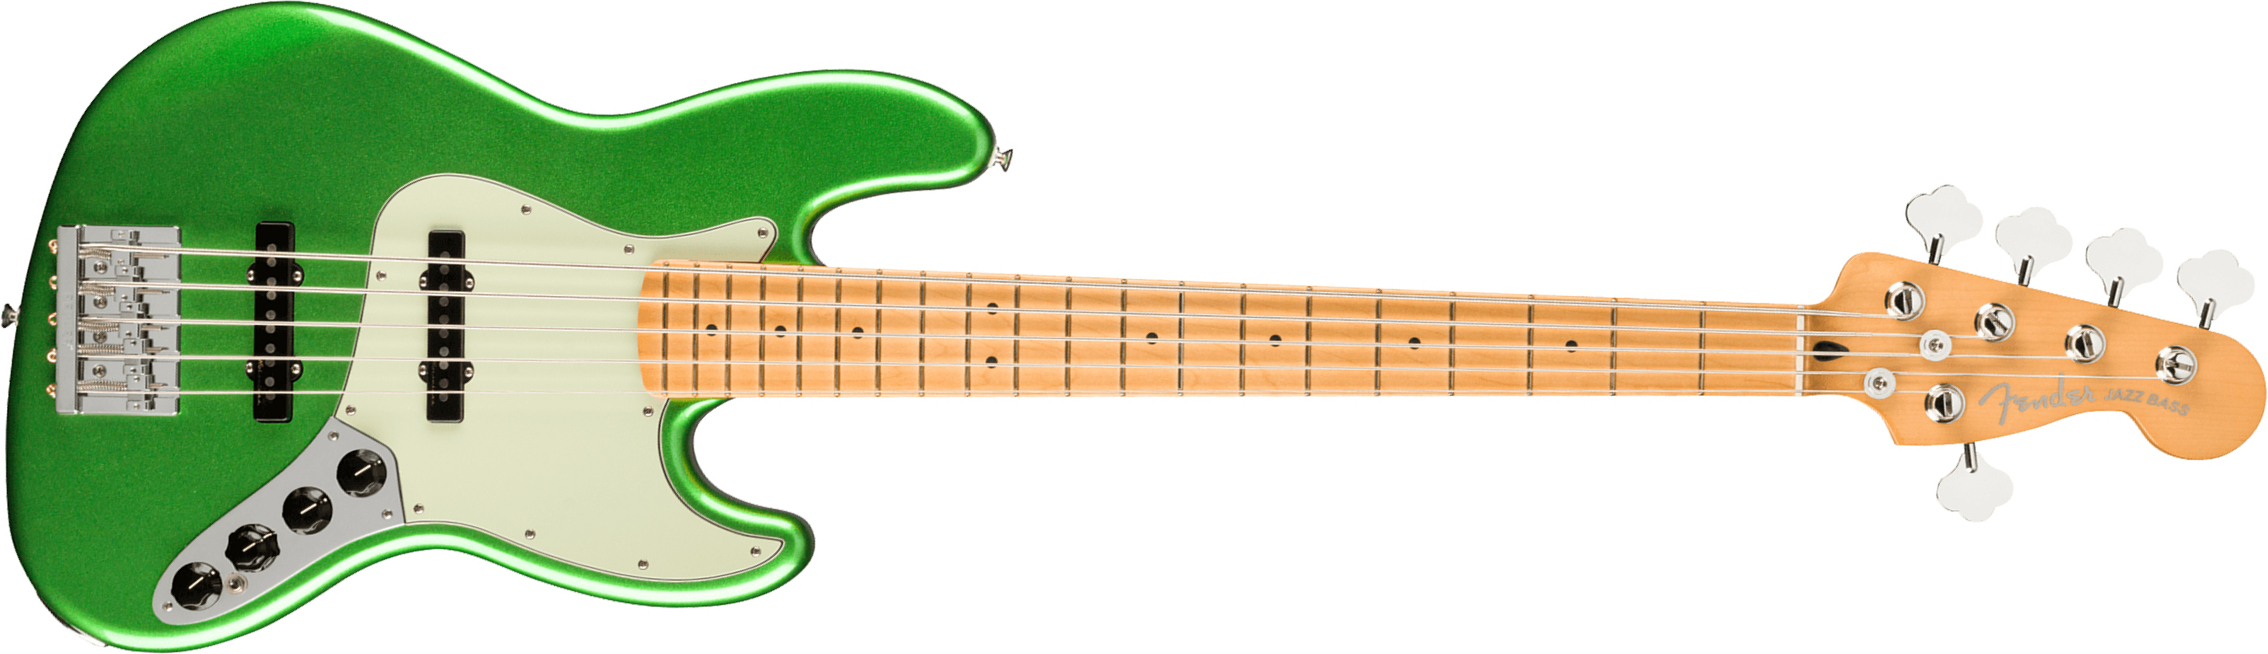 Fender Jazz Bass Player Plus V Mex 5c Active Mn - Cosmic Jade - Solidbody E-bass - Main picture